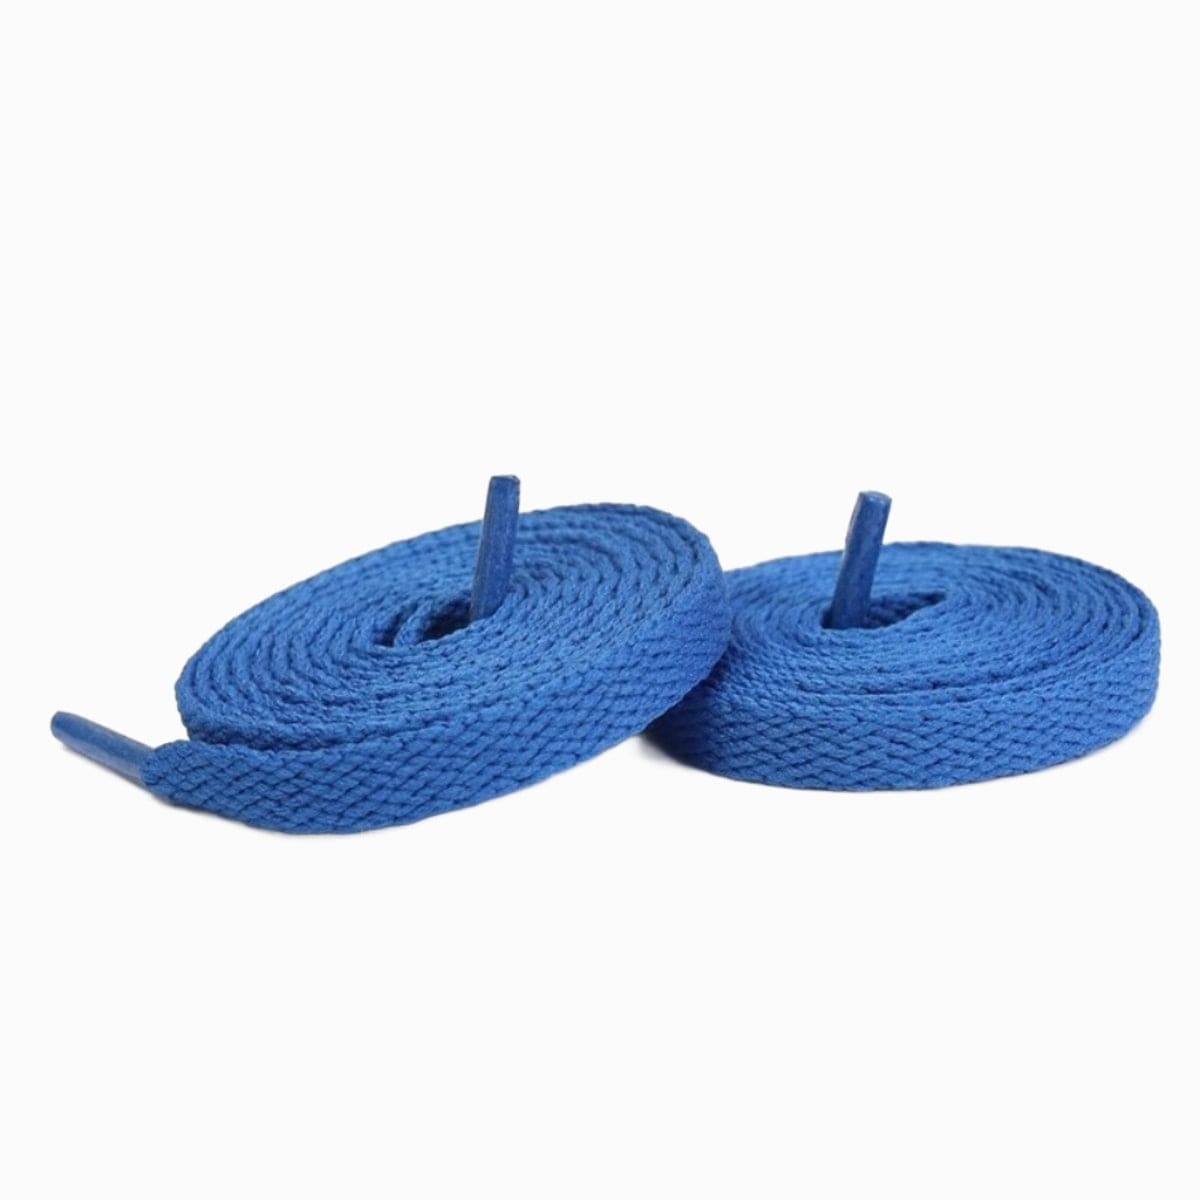 Royal Blue Replacement Shoe Laces for Adidas Handball Spezial Sneakers by Kicks Shoelaces